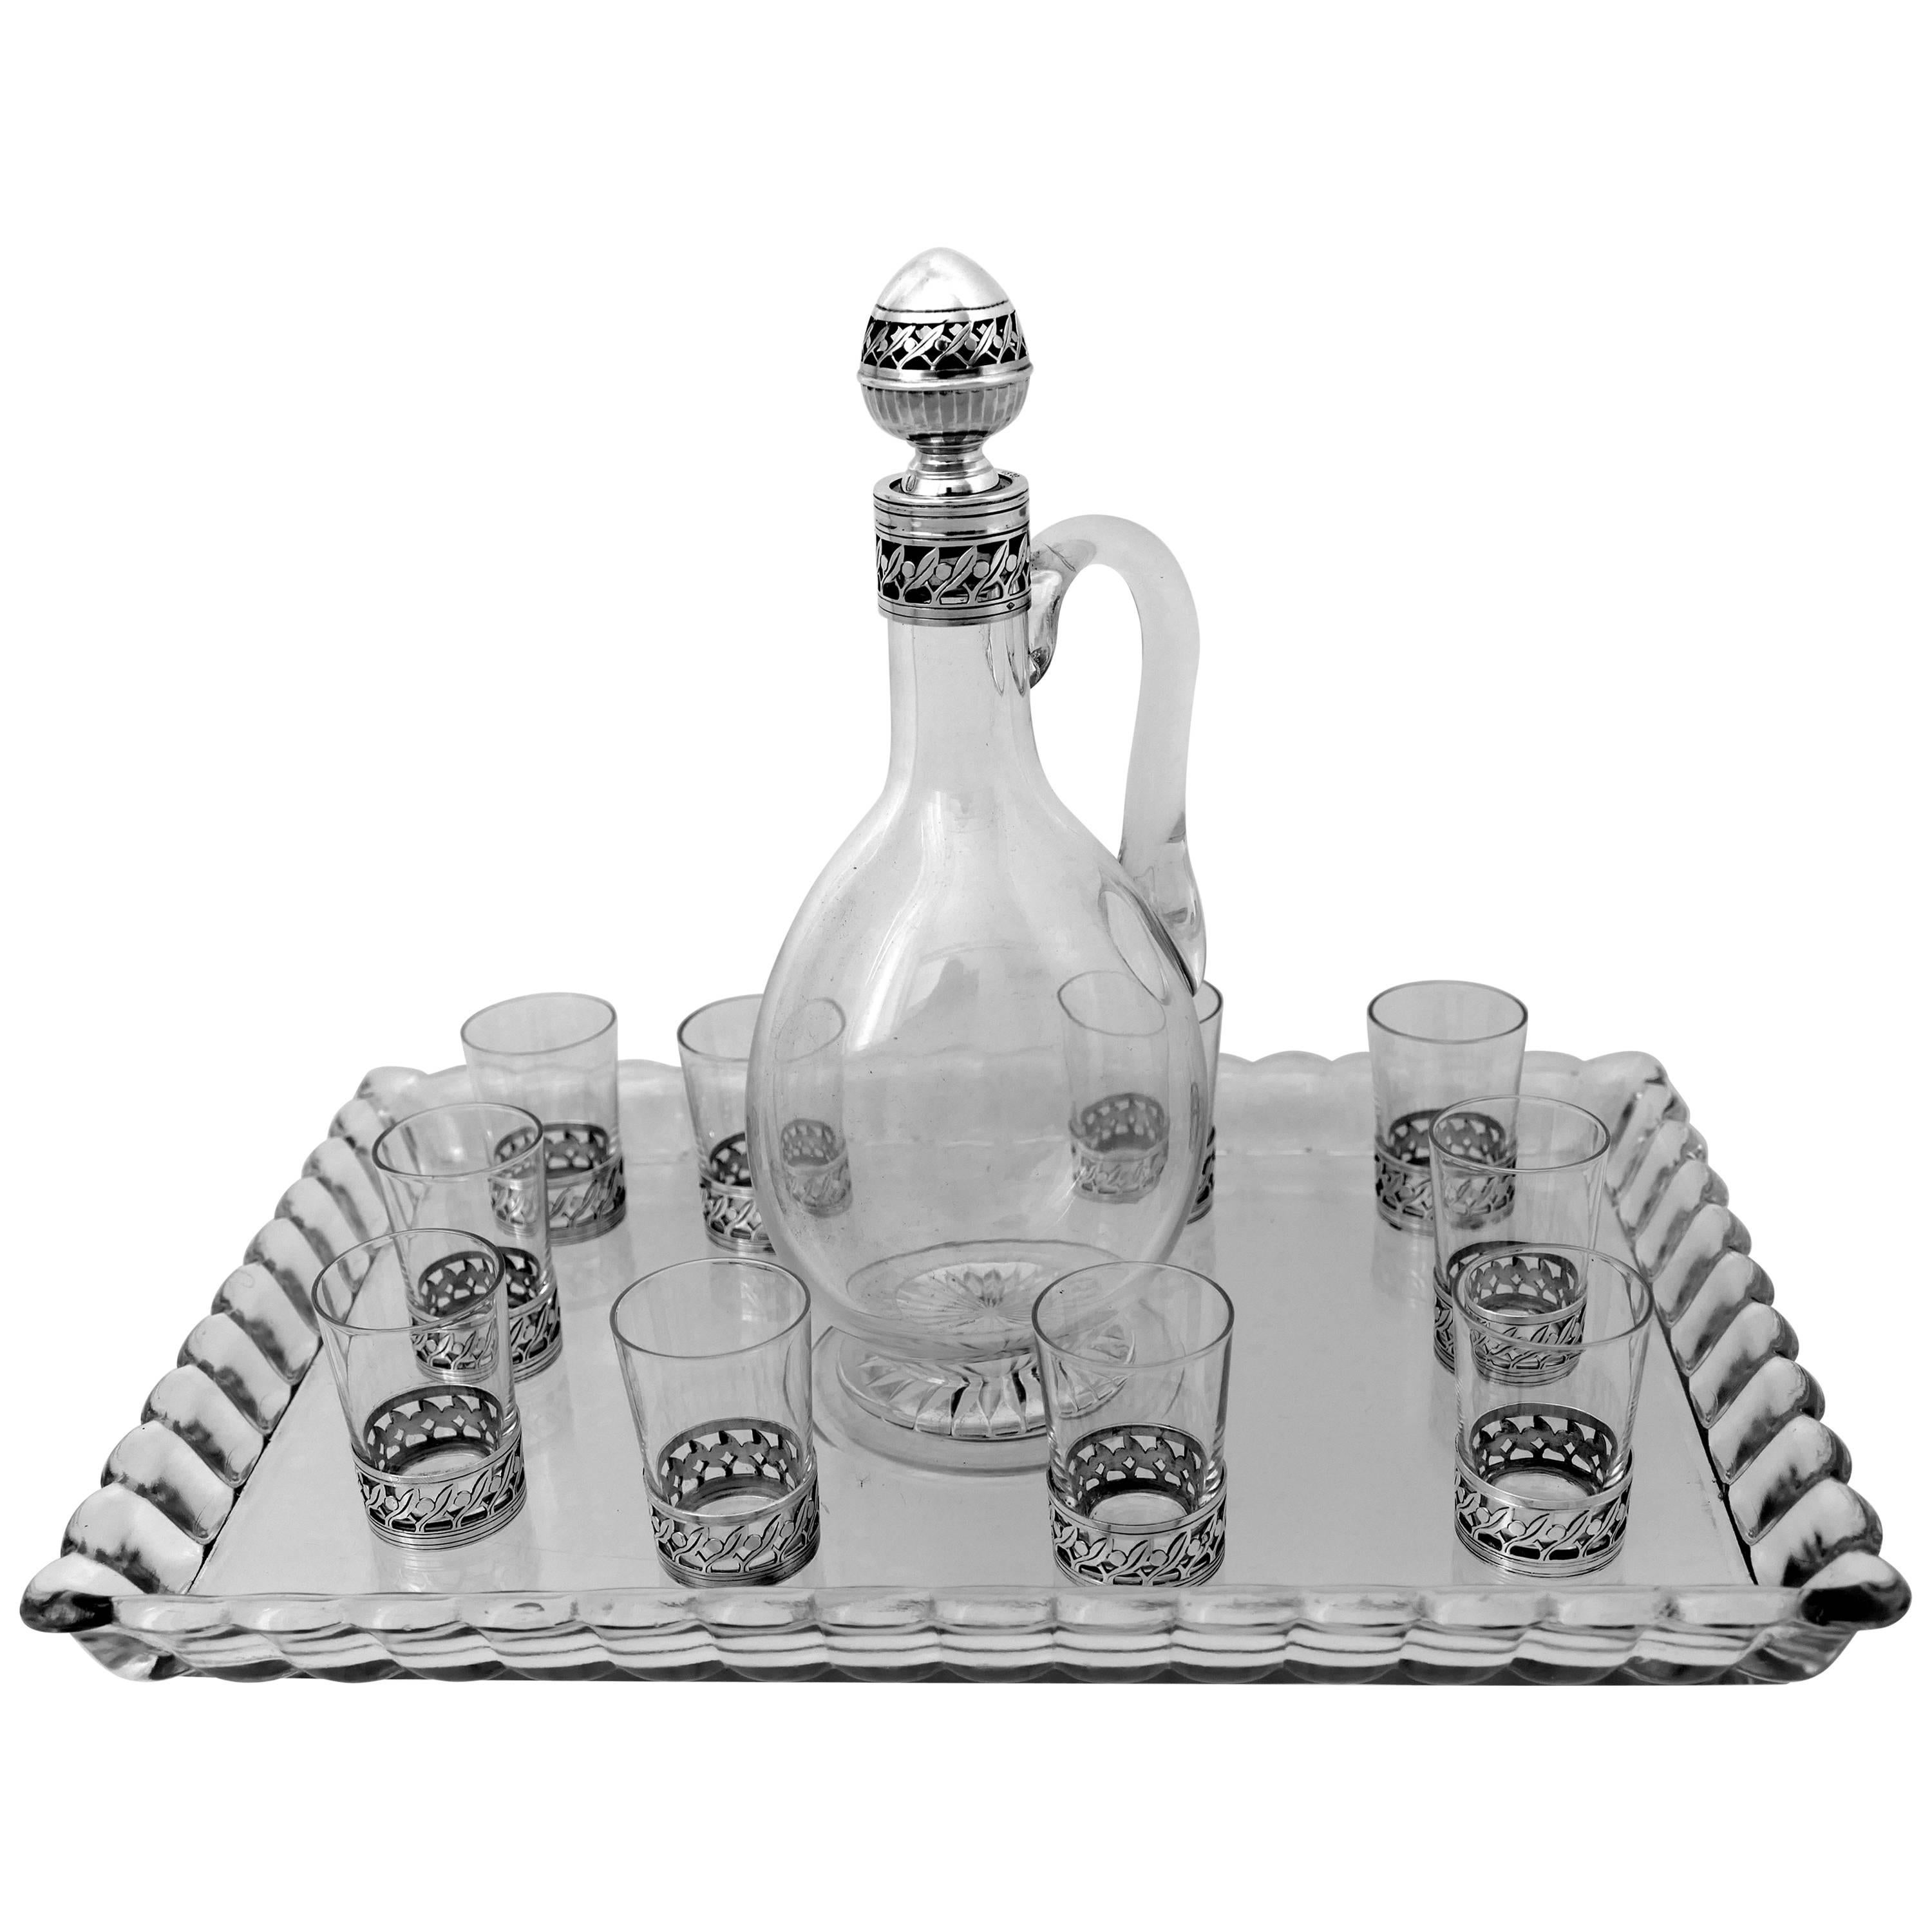 Christofle Rare French Sterling Silver Baccarat Crystal Liquor Service with tray